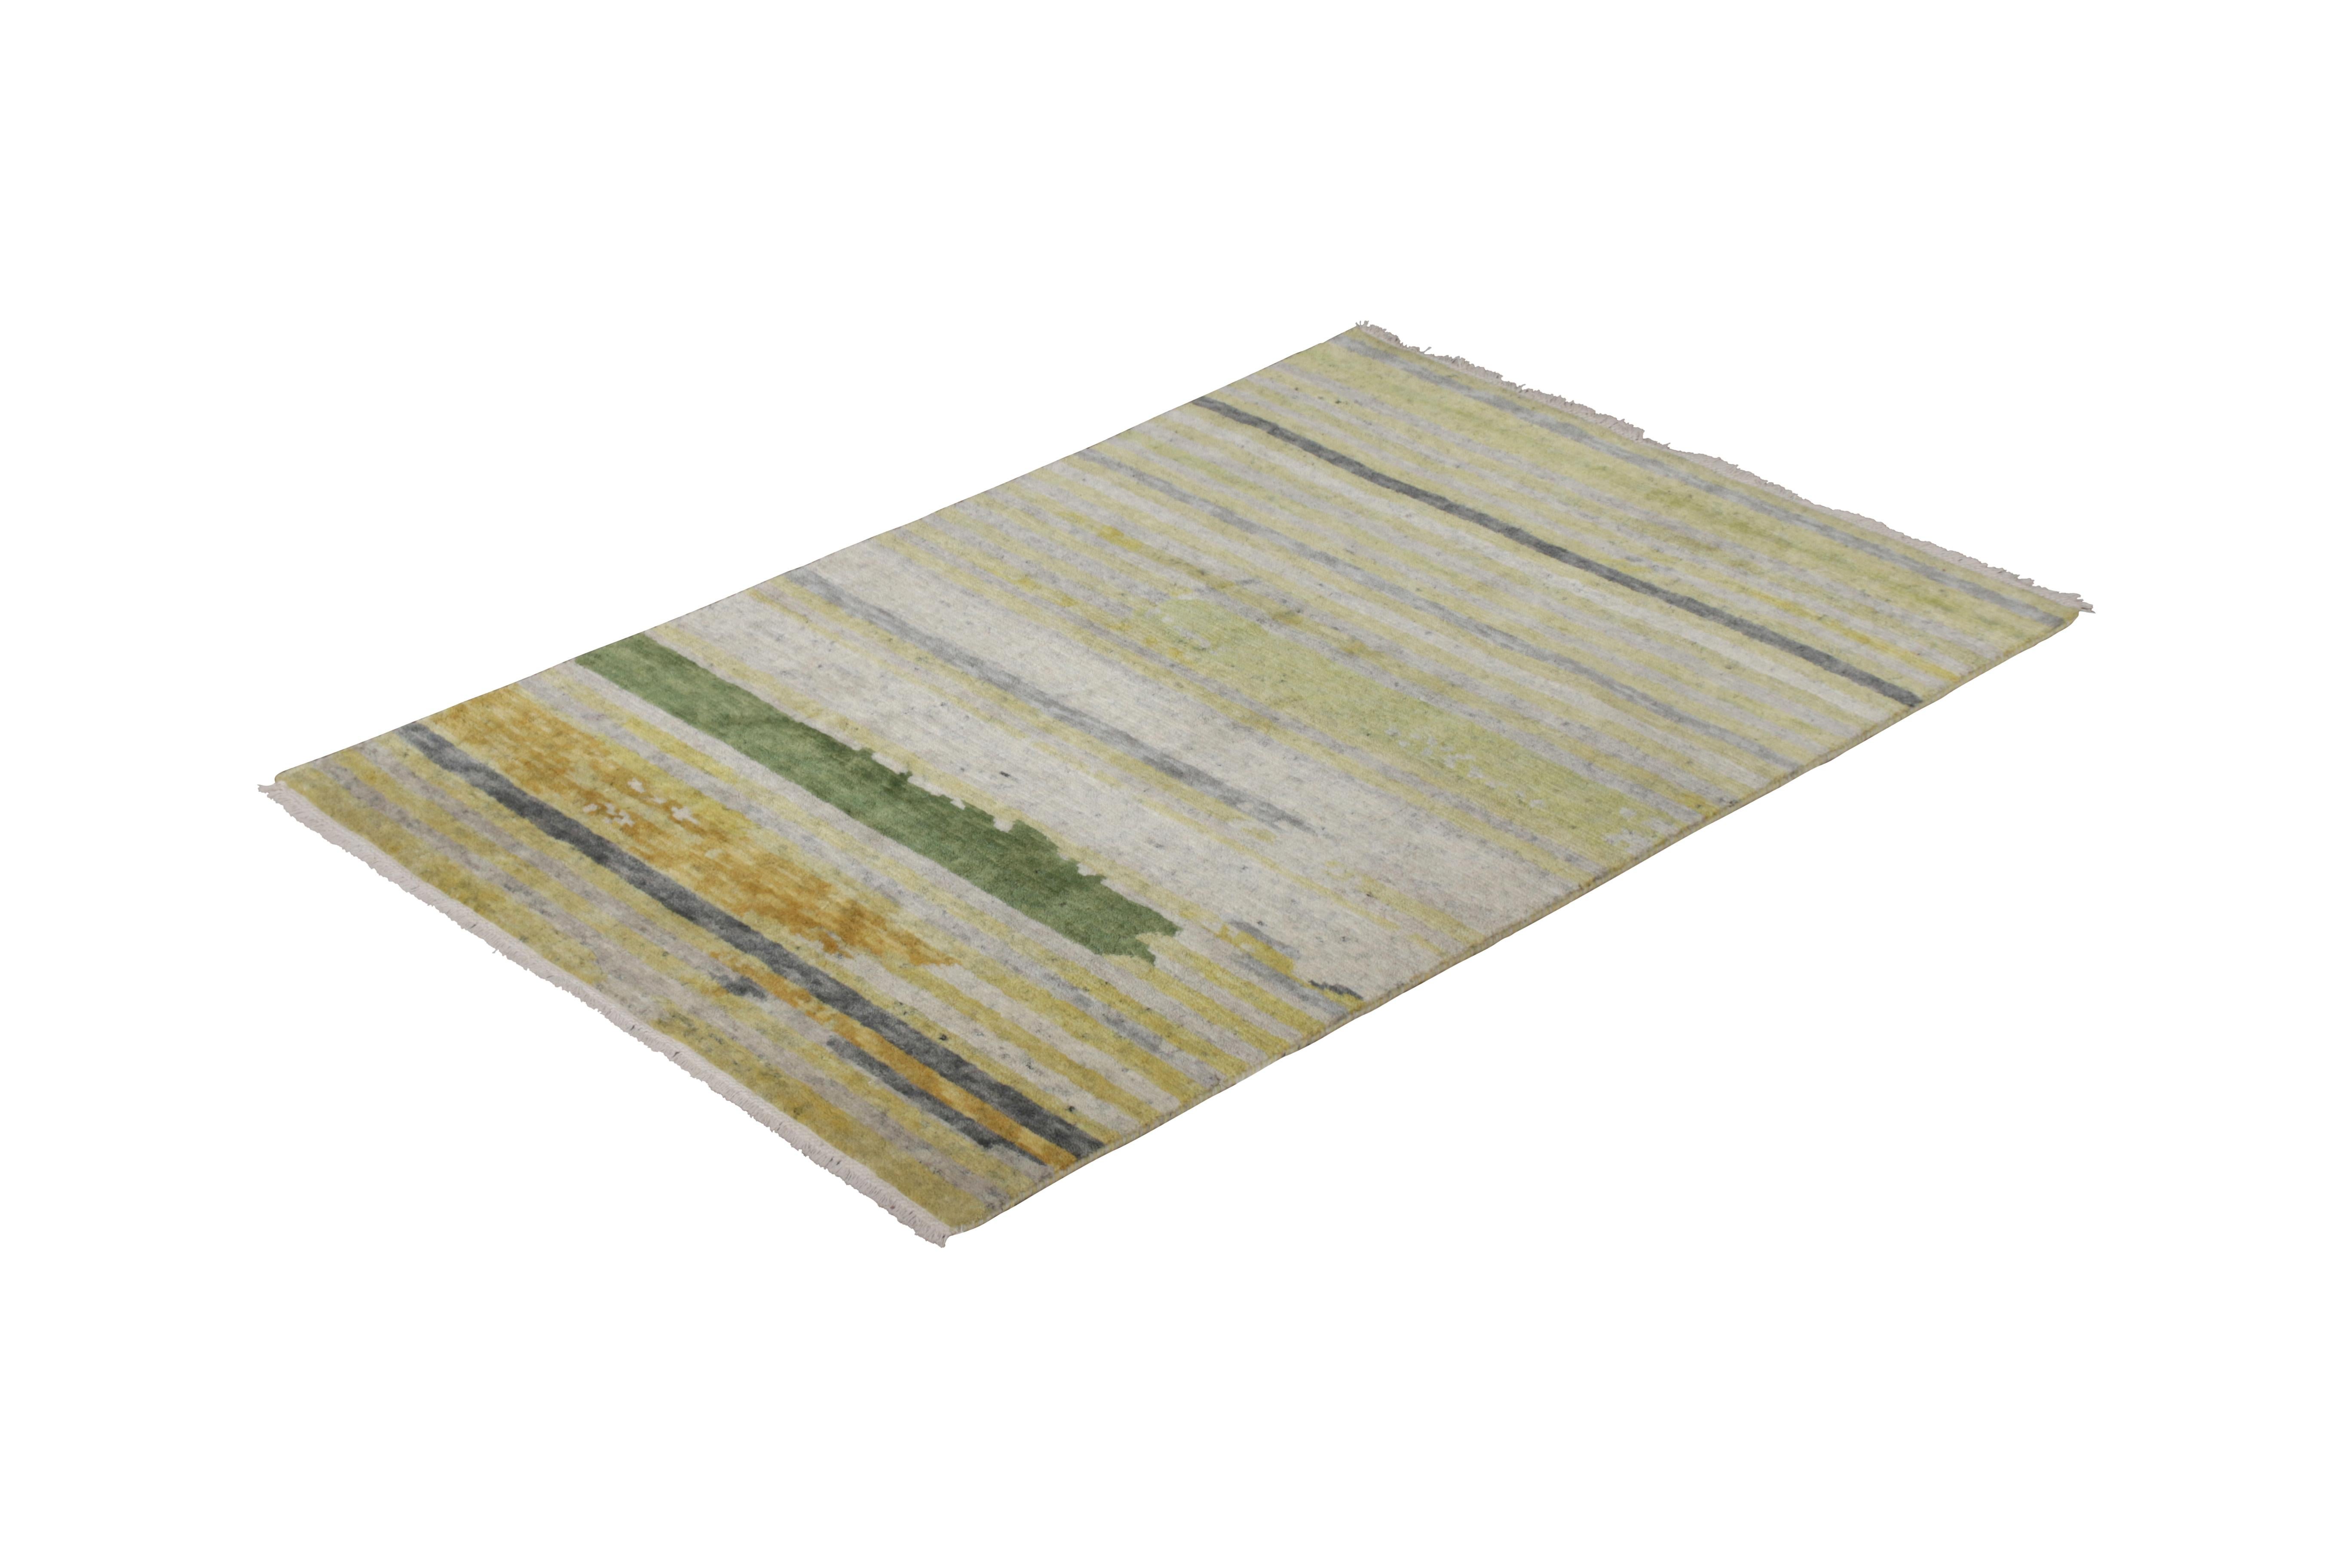 Hand-Knotted in wool, this 4×6 abstract rug joins the New & Modern rug collection by Rug & Kilim, enjoying a particularly unique colorway approach to contemporary stripe patterns like this play of handsome green, gray, beige, gold, and yellow